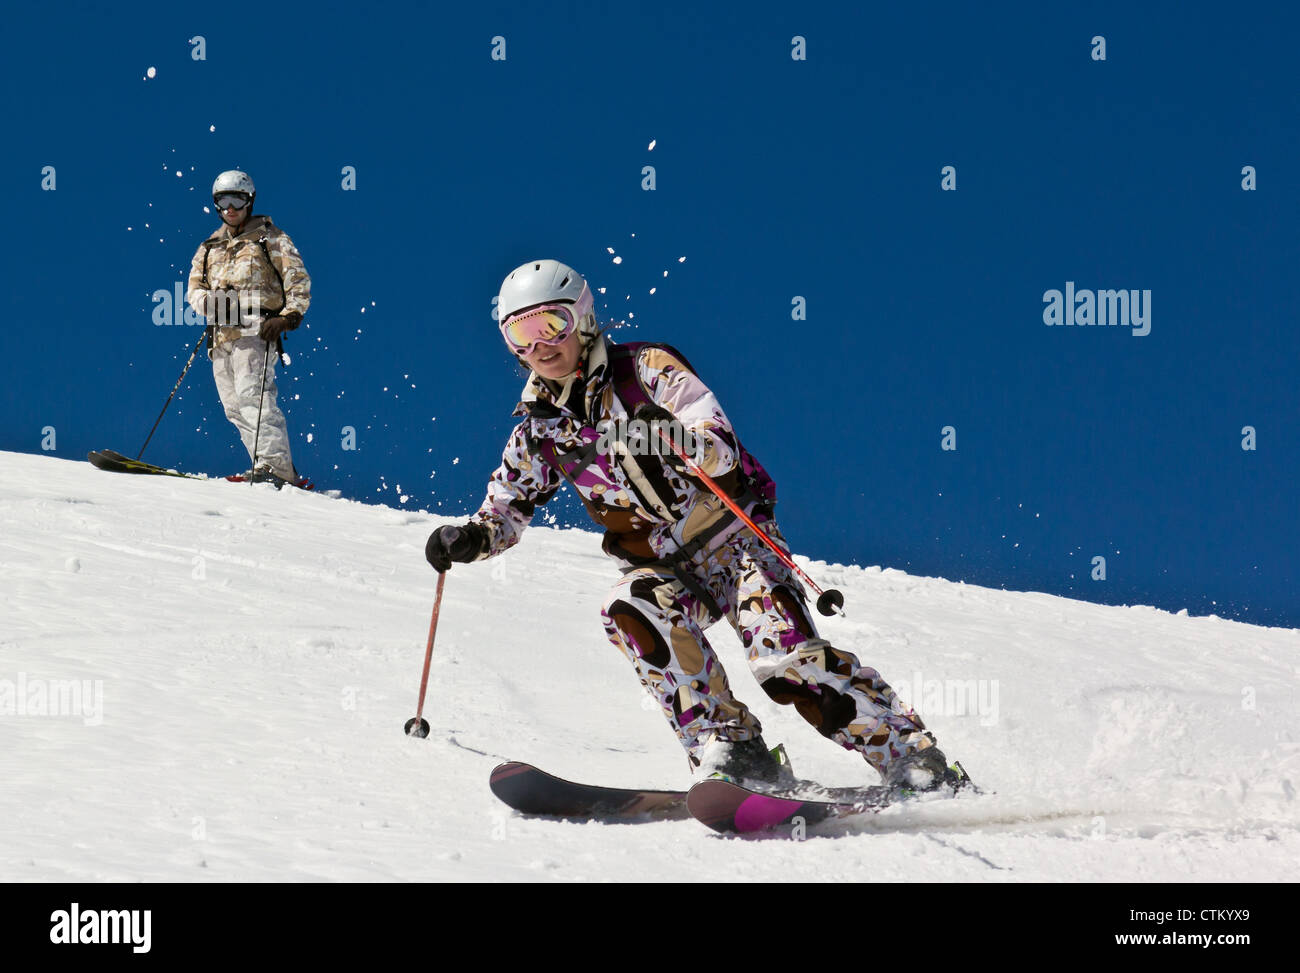 Woman skier descends the steep slope in deep snow in the sun. Stock Photo